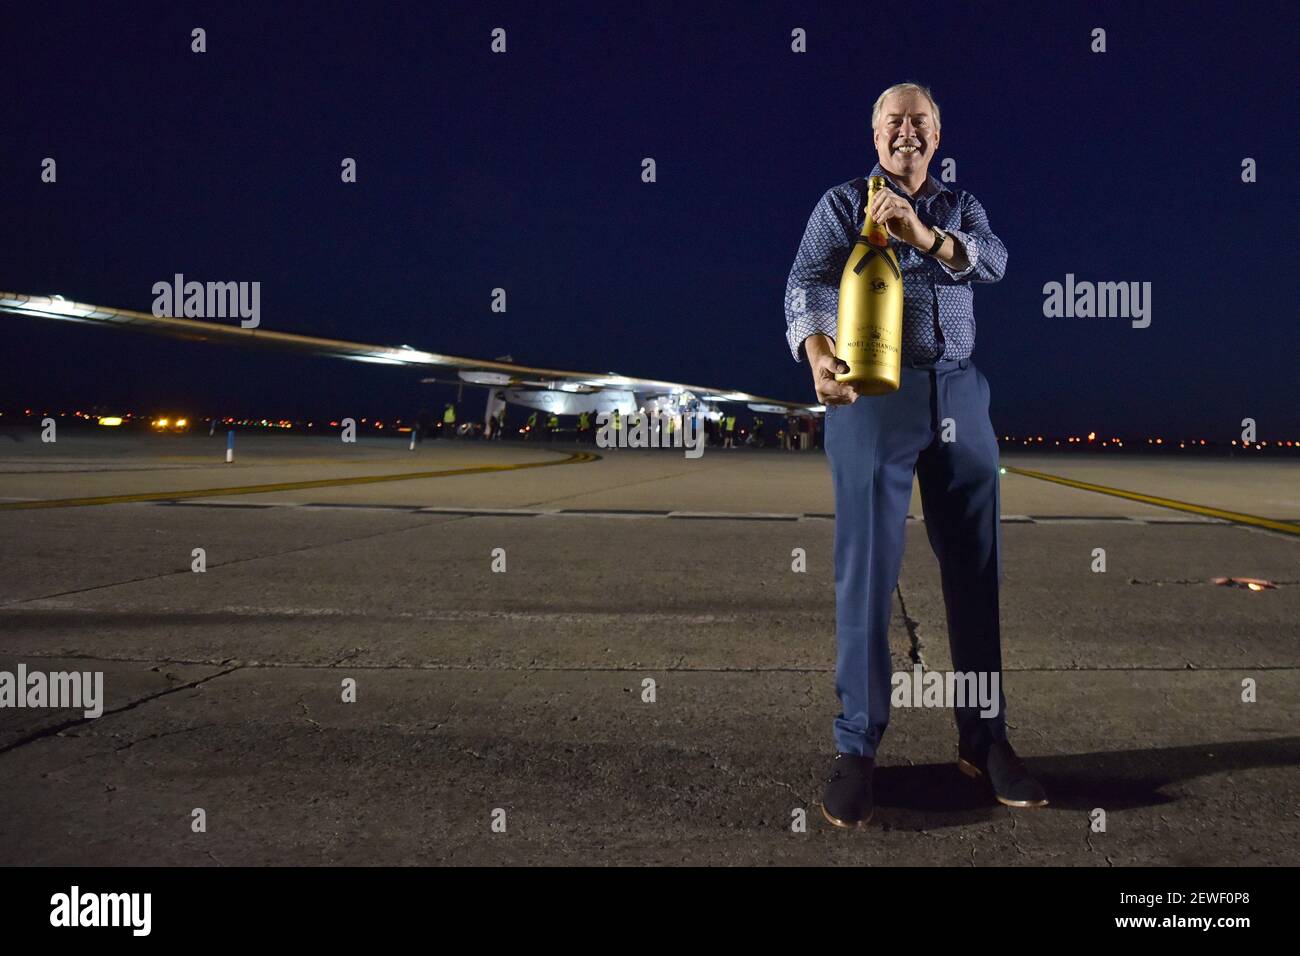 Jim Clerkin, CEO of Moet Hennessy, poses near the sun-powers Solar Impulse  2 after landing at JFK International Airport in New York, NY, on June 11,  2016. Pilot Andre Borschberg arrived at